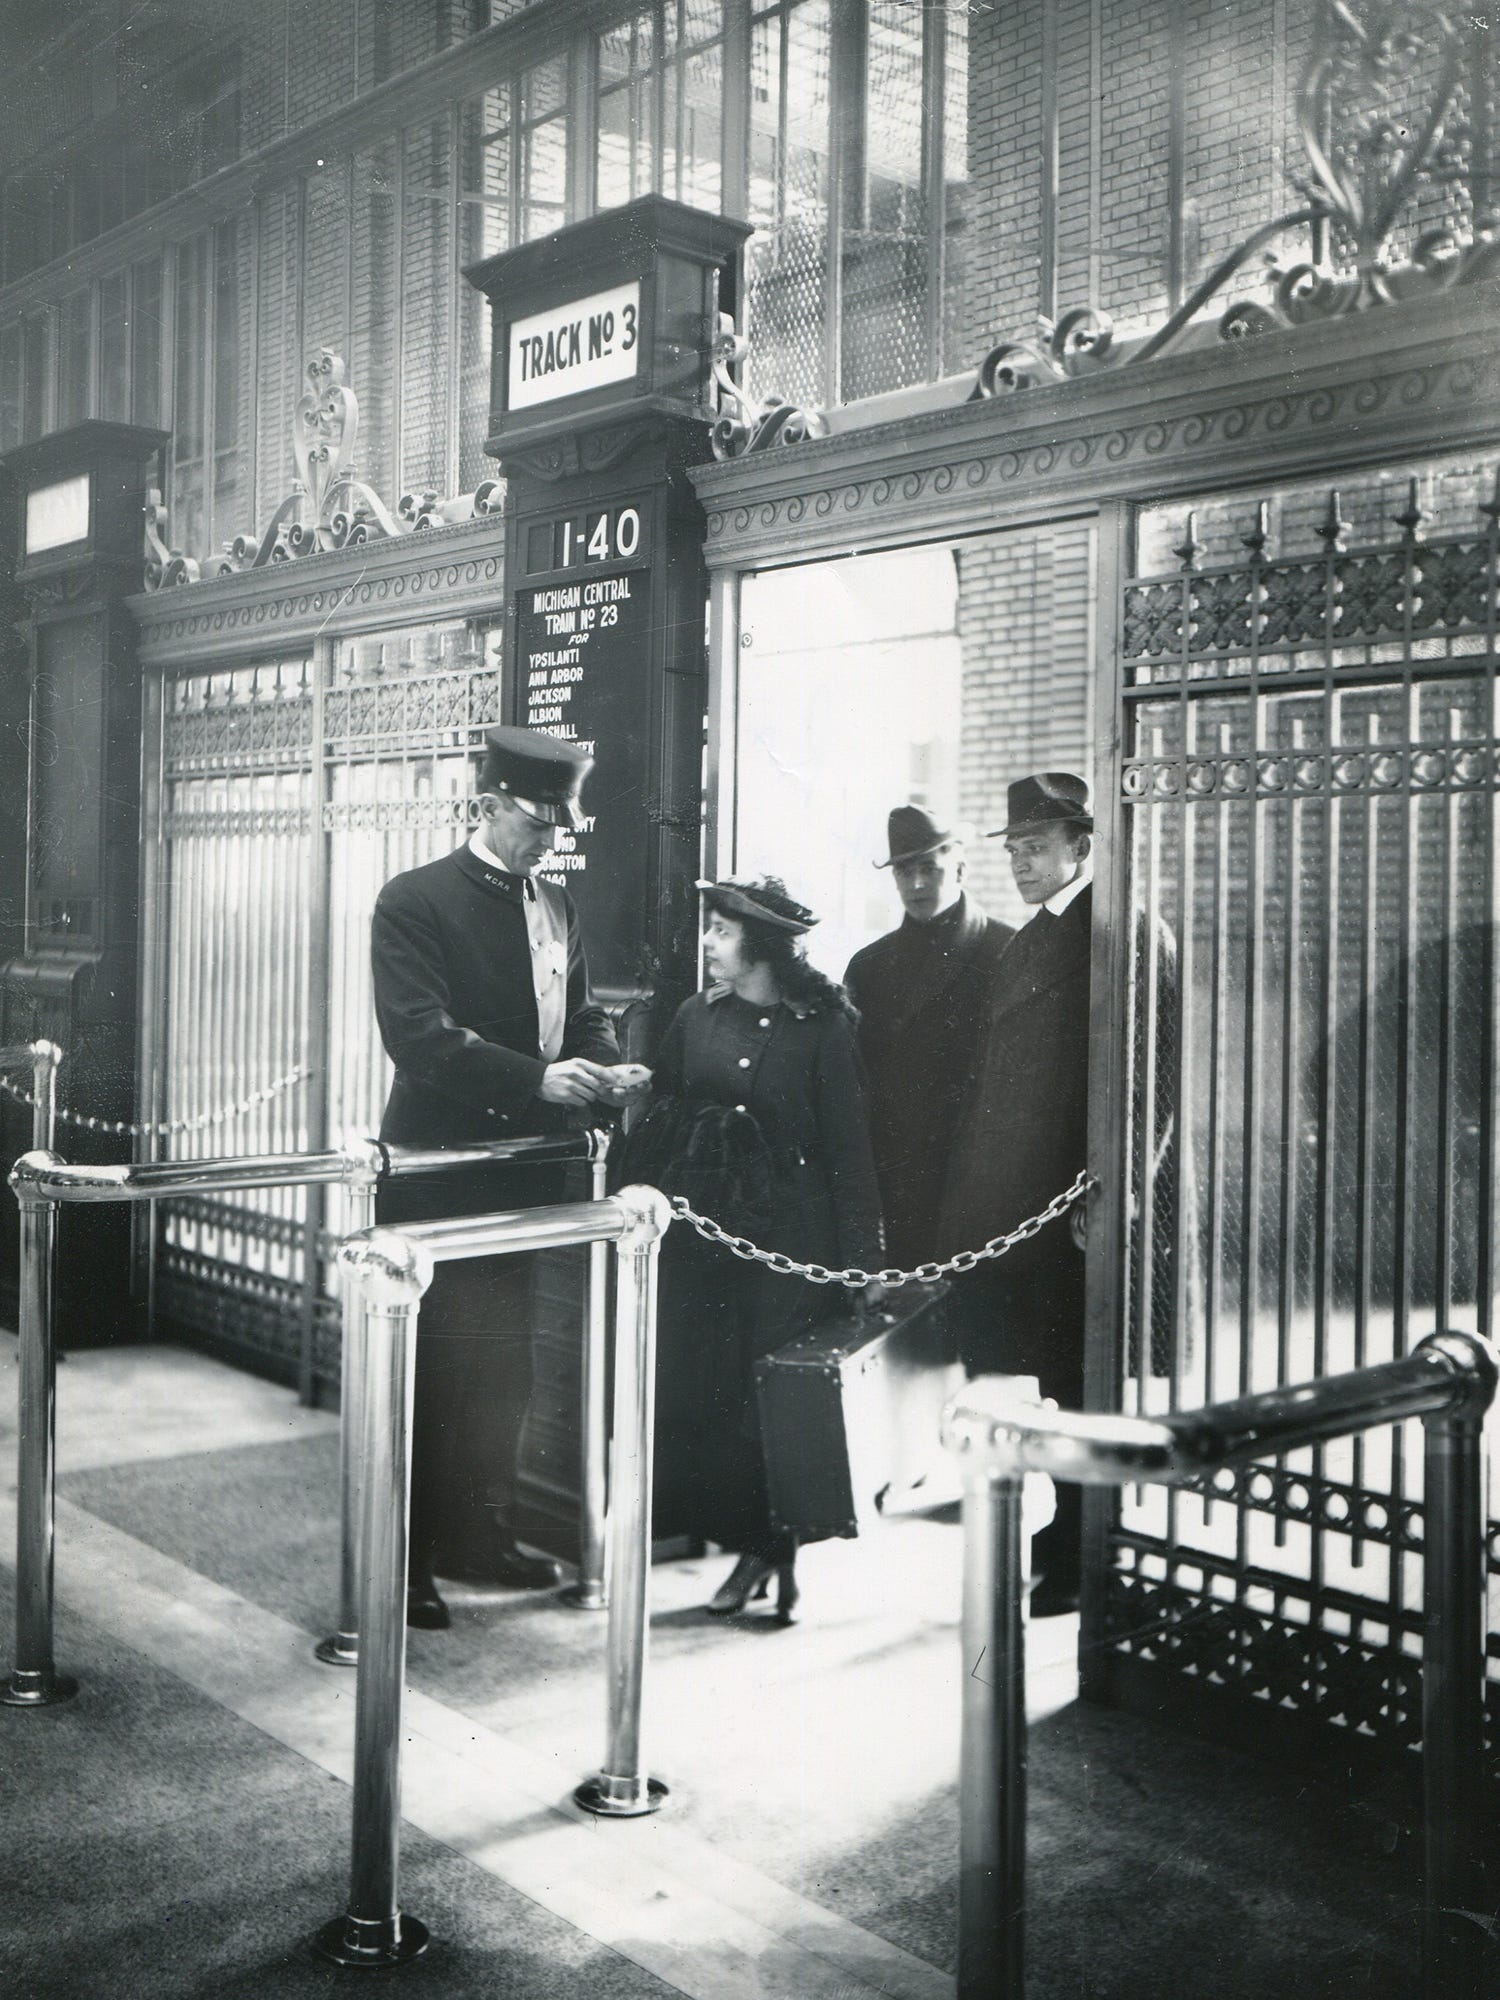 A stationmaster checks a passenger's ticket at Michigan Central Depot in an undated photo.